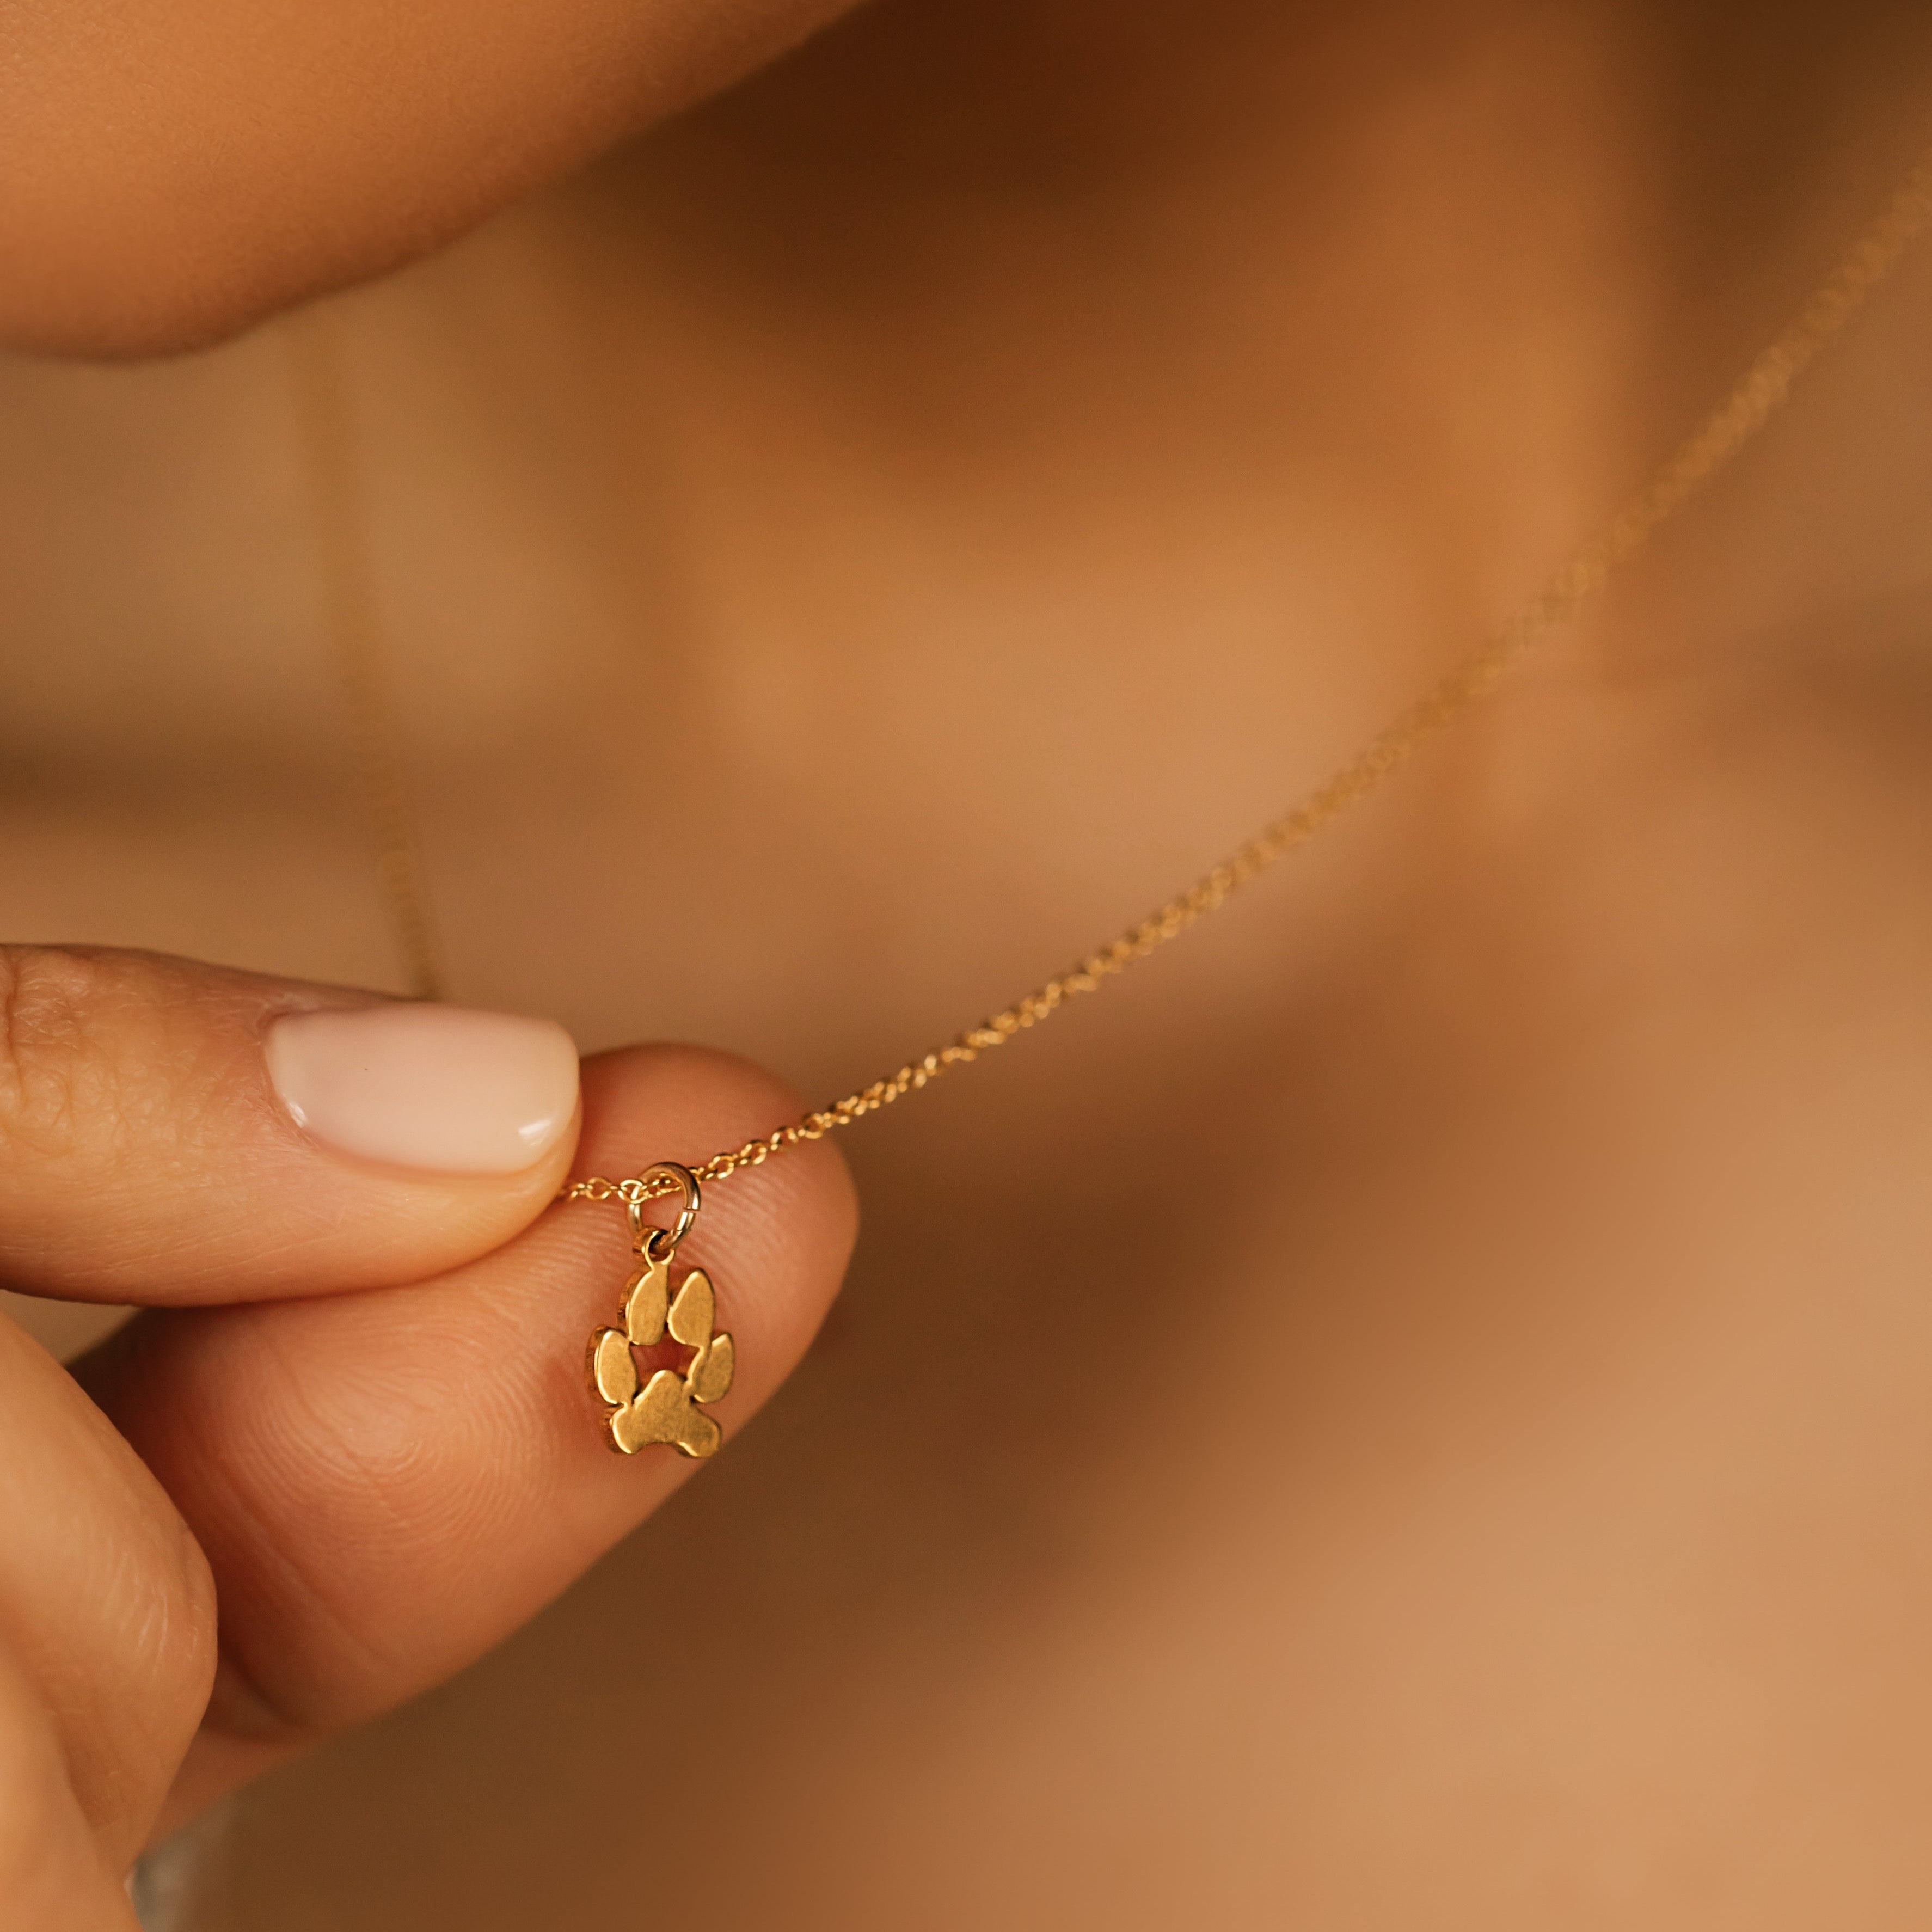 gold paw print necklace made from actual paw prints